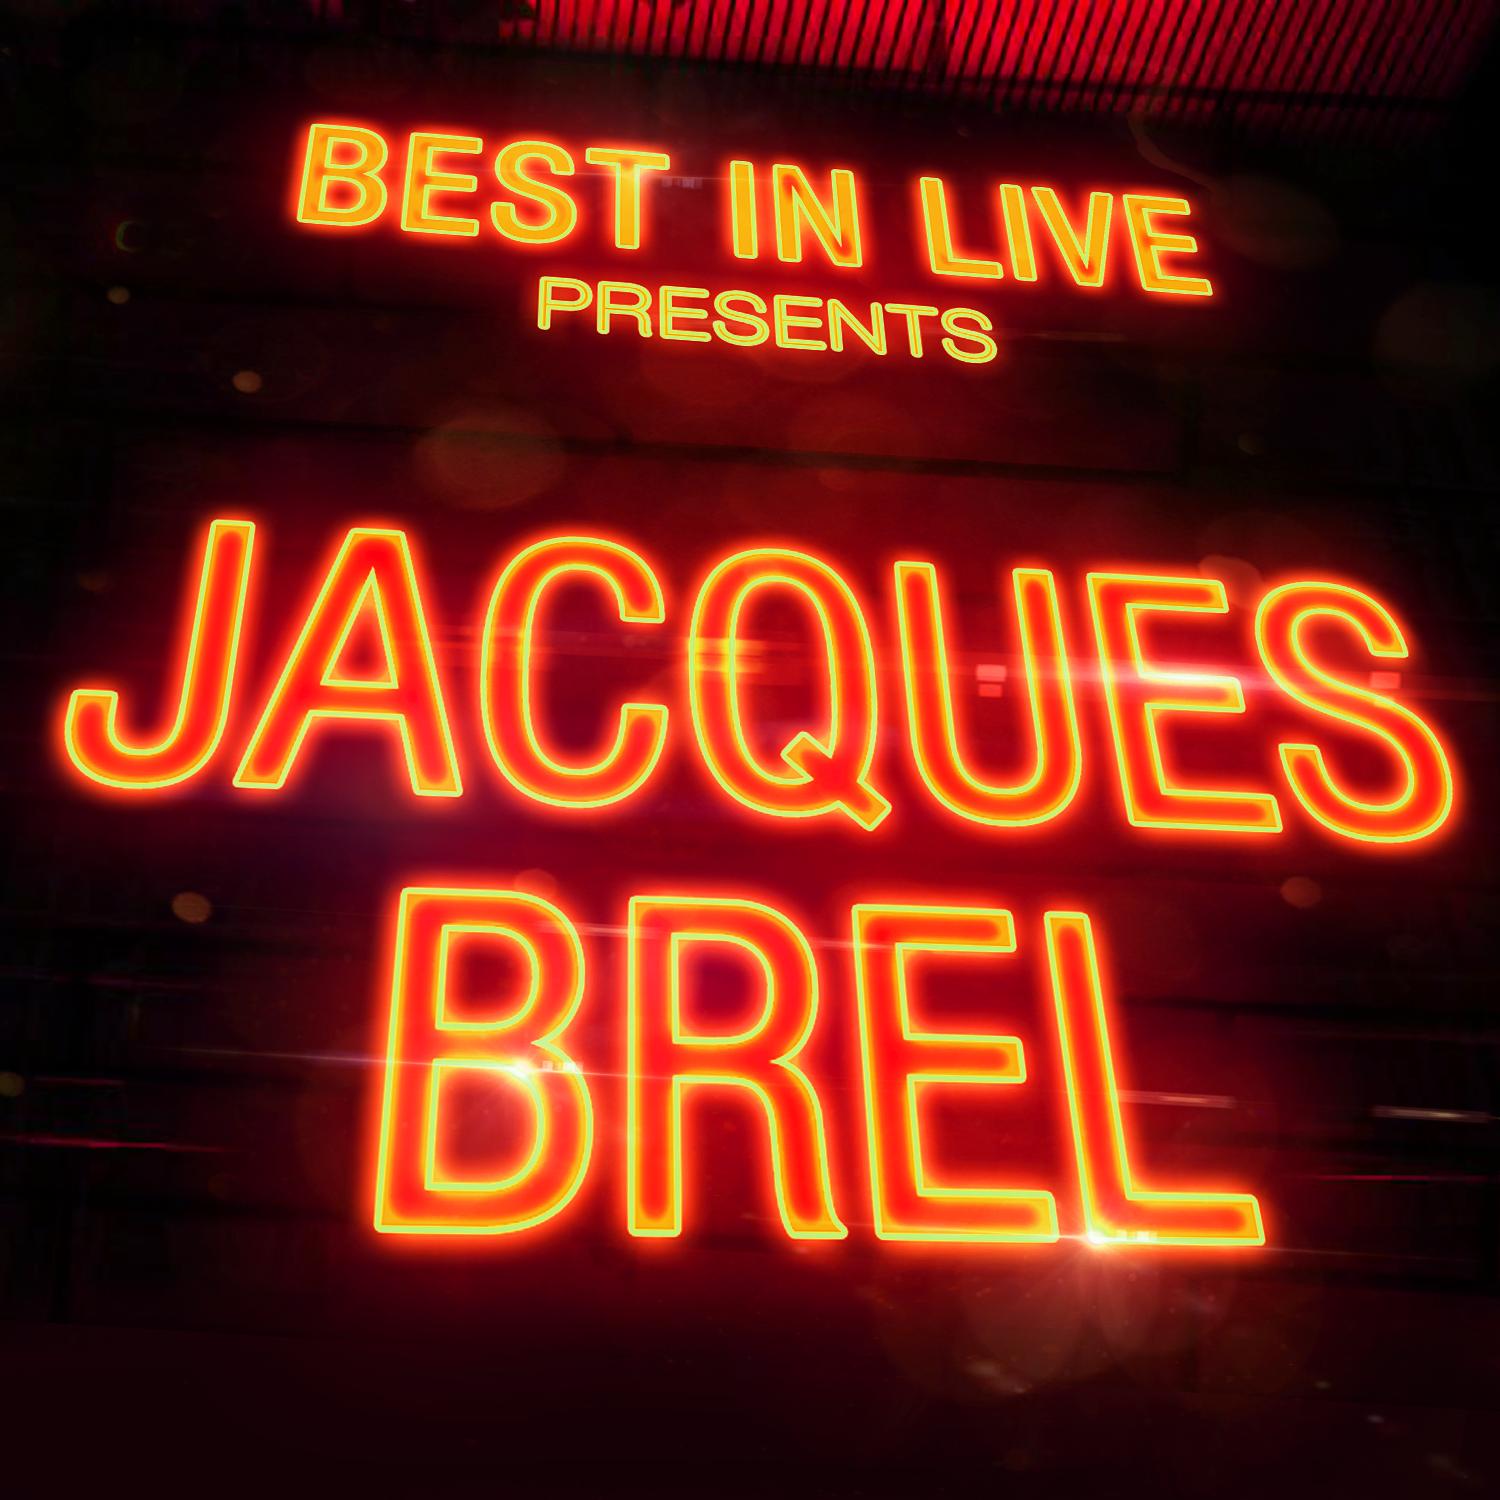 Best in Live: Jacques Brel